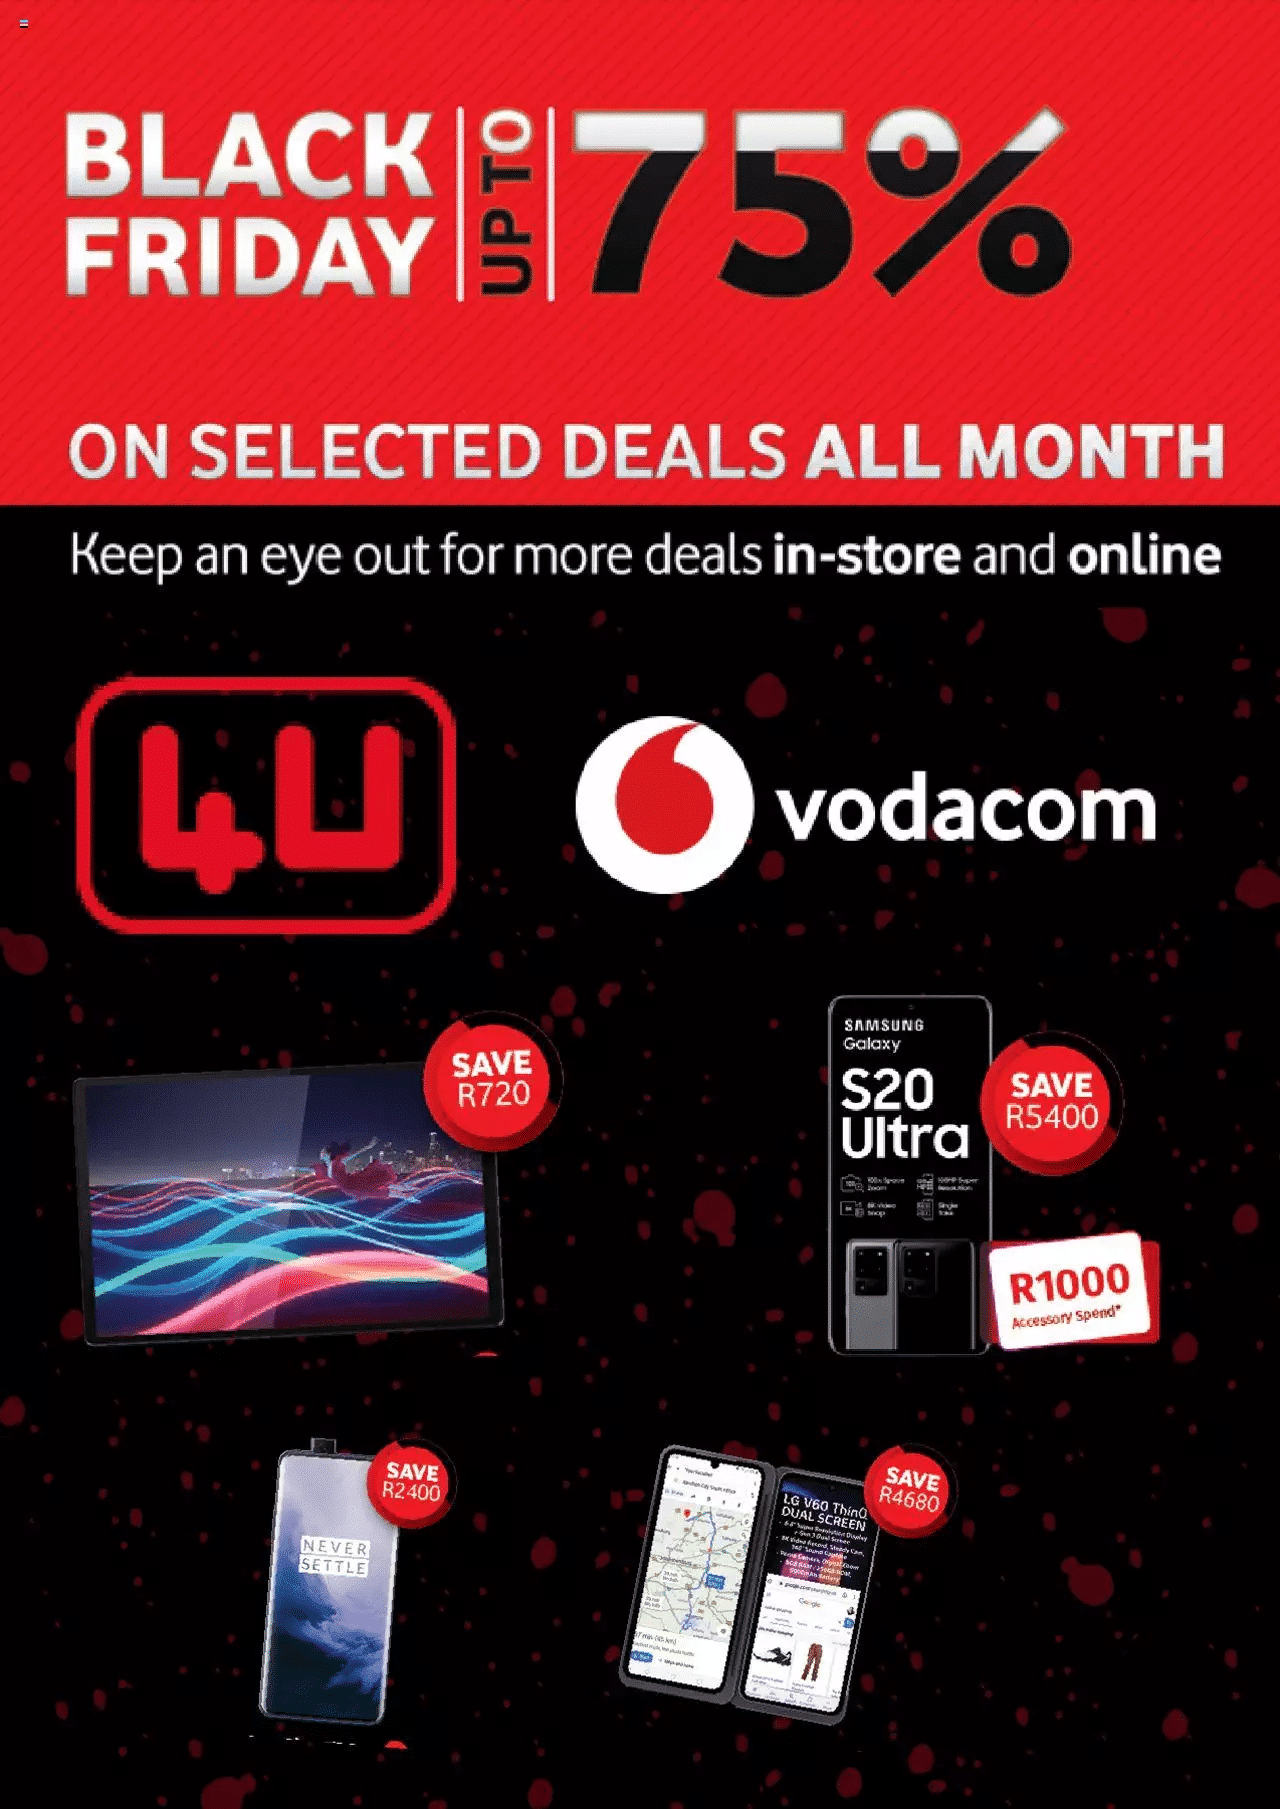 Vodacom Black Friday Deals & Specials 2021 - What Are The Online Black Friday Deals